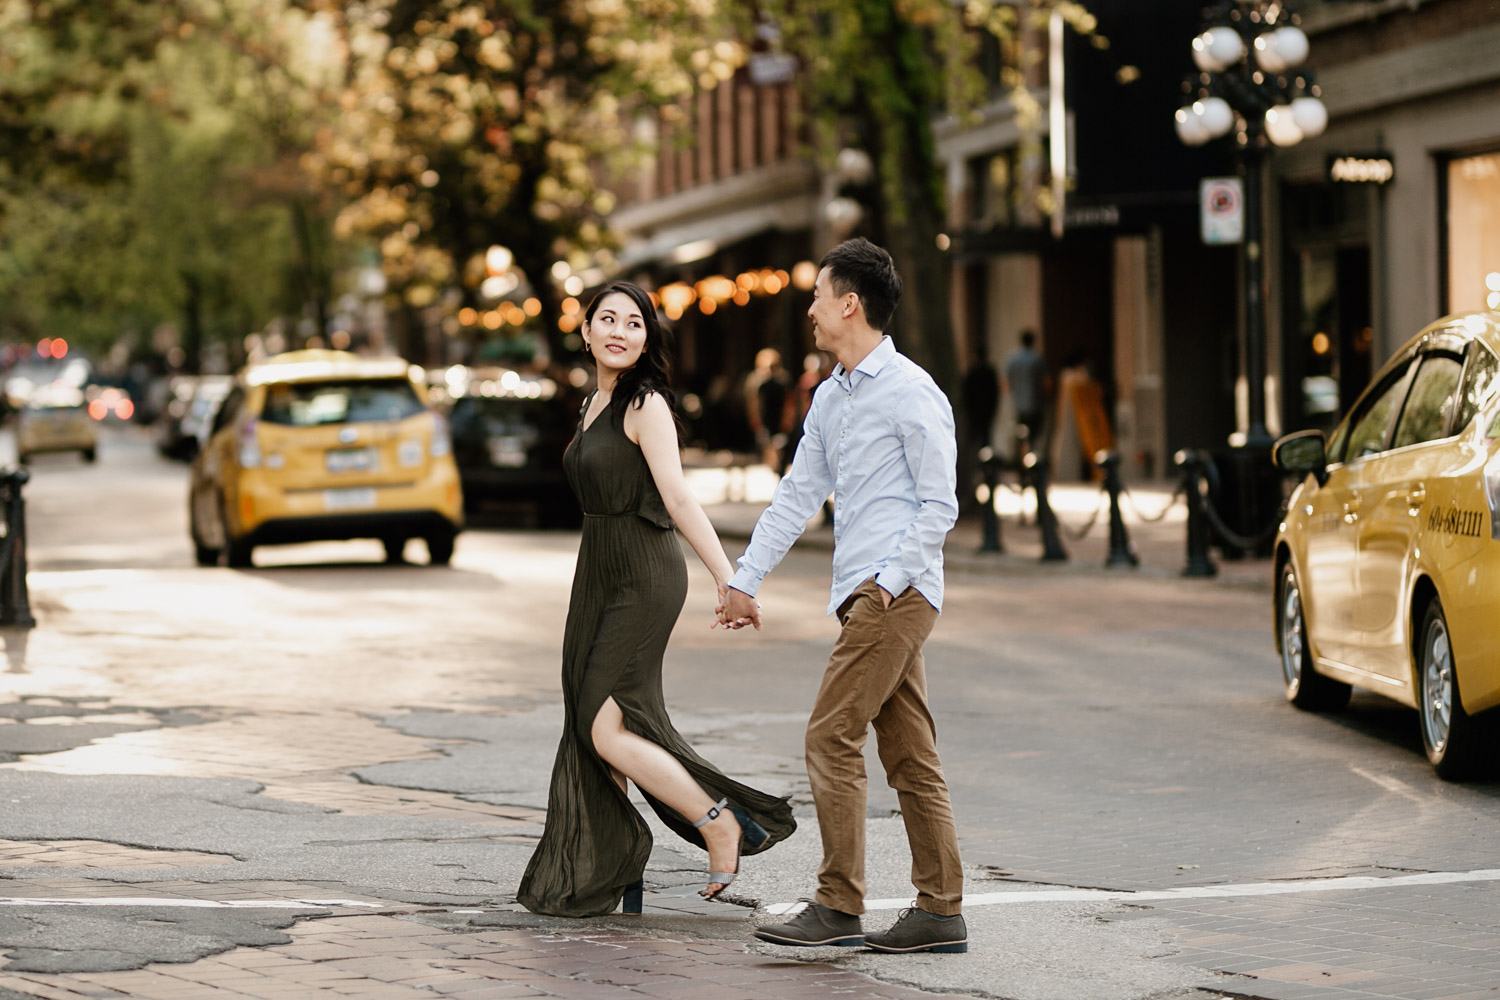 gastown engagement photography in vancouver bc during sunset or golden hour